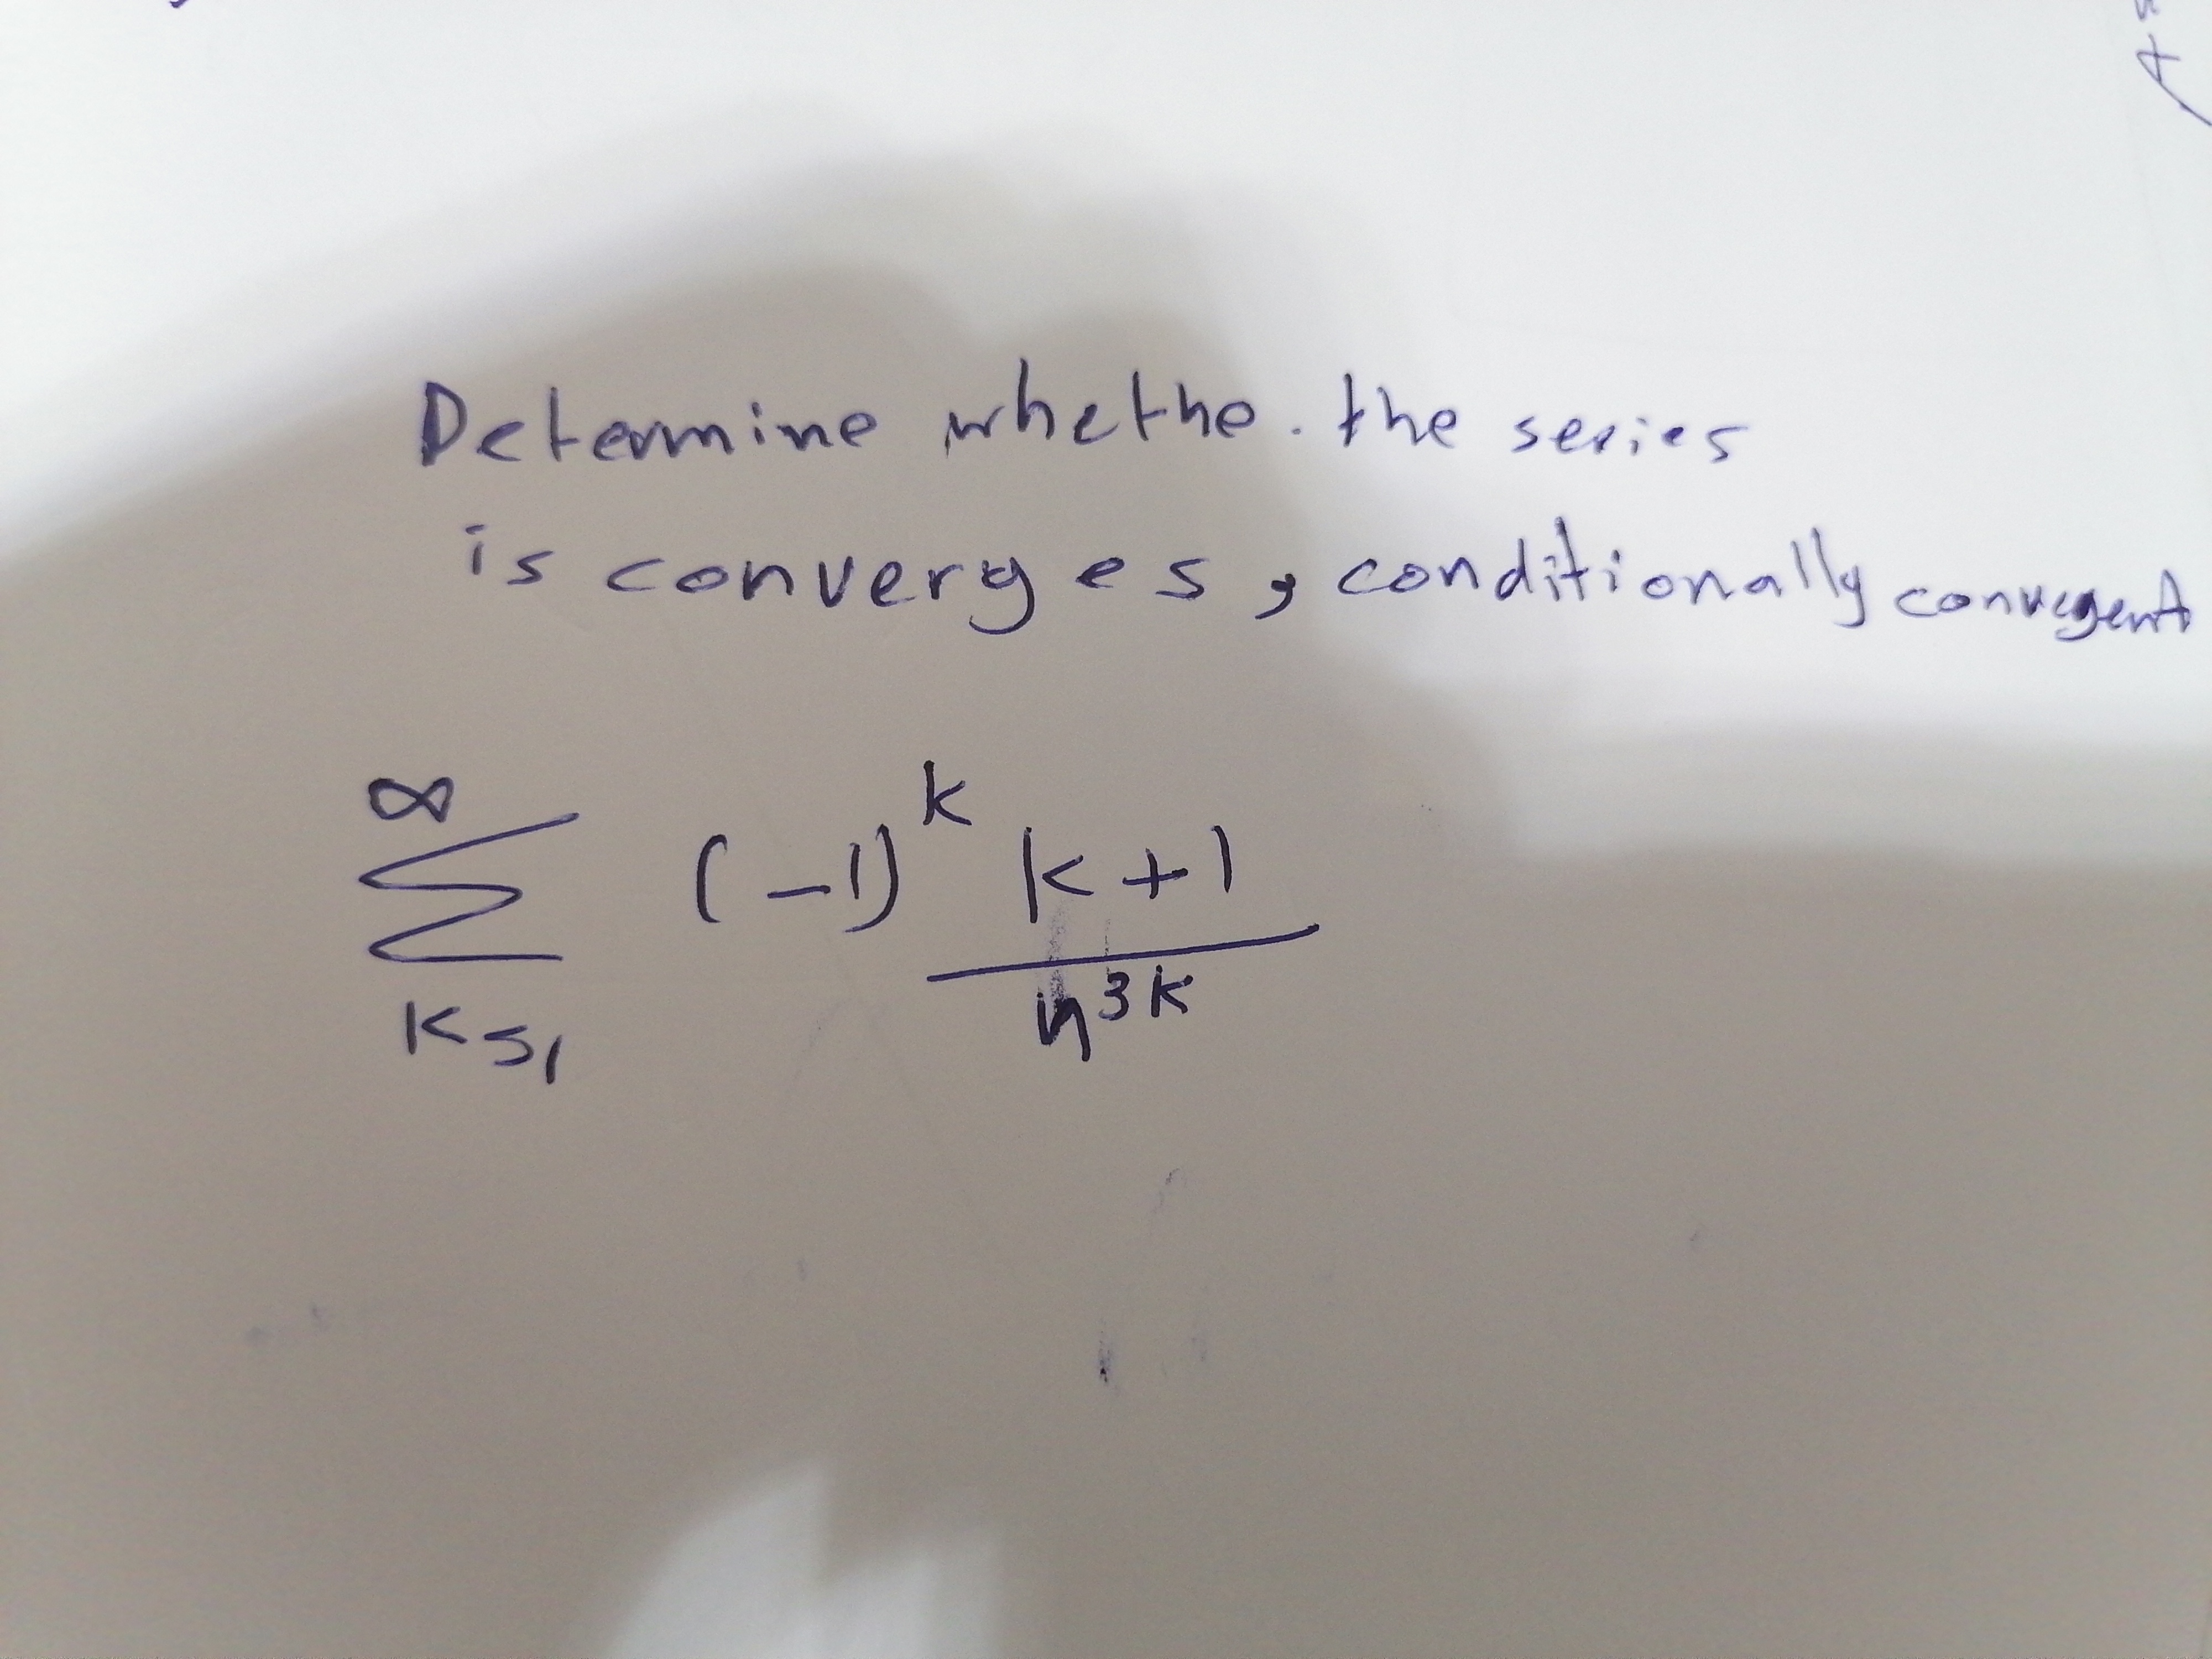 Determine whethe.the series
's converyes, conditionally
g convegent
k
( ーリk+1
り3k
